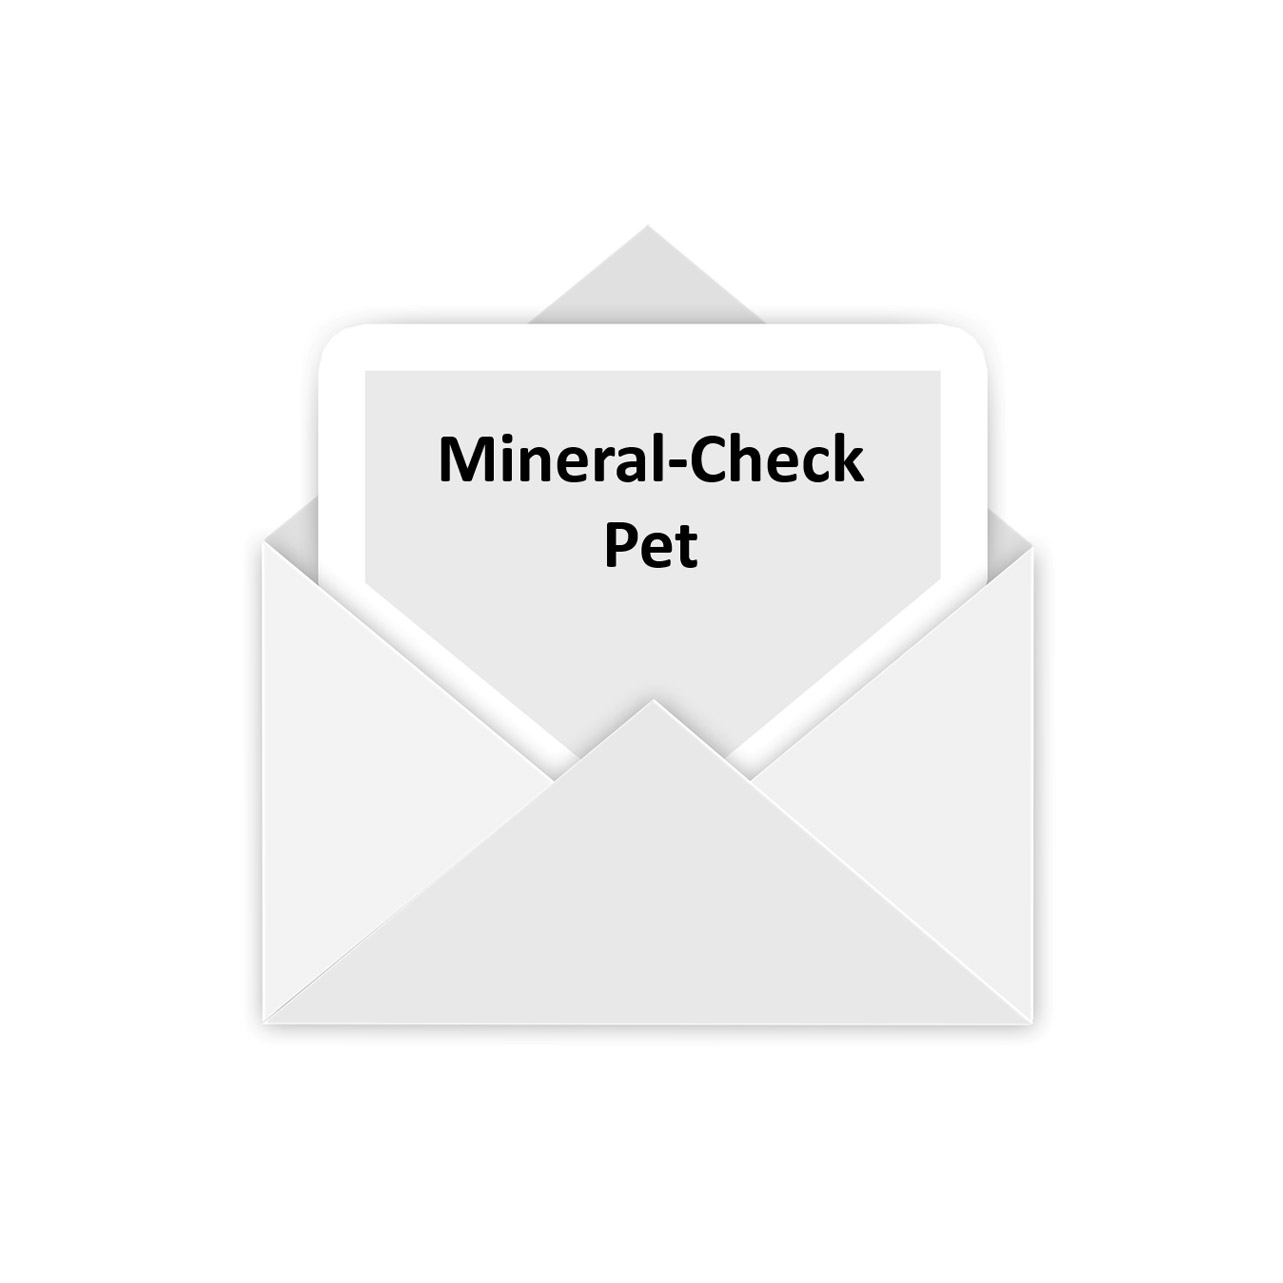 Mineral-Check Pet